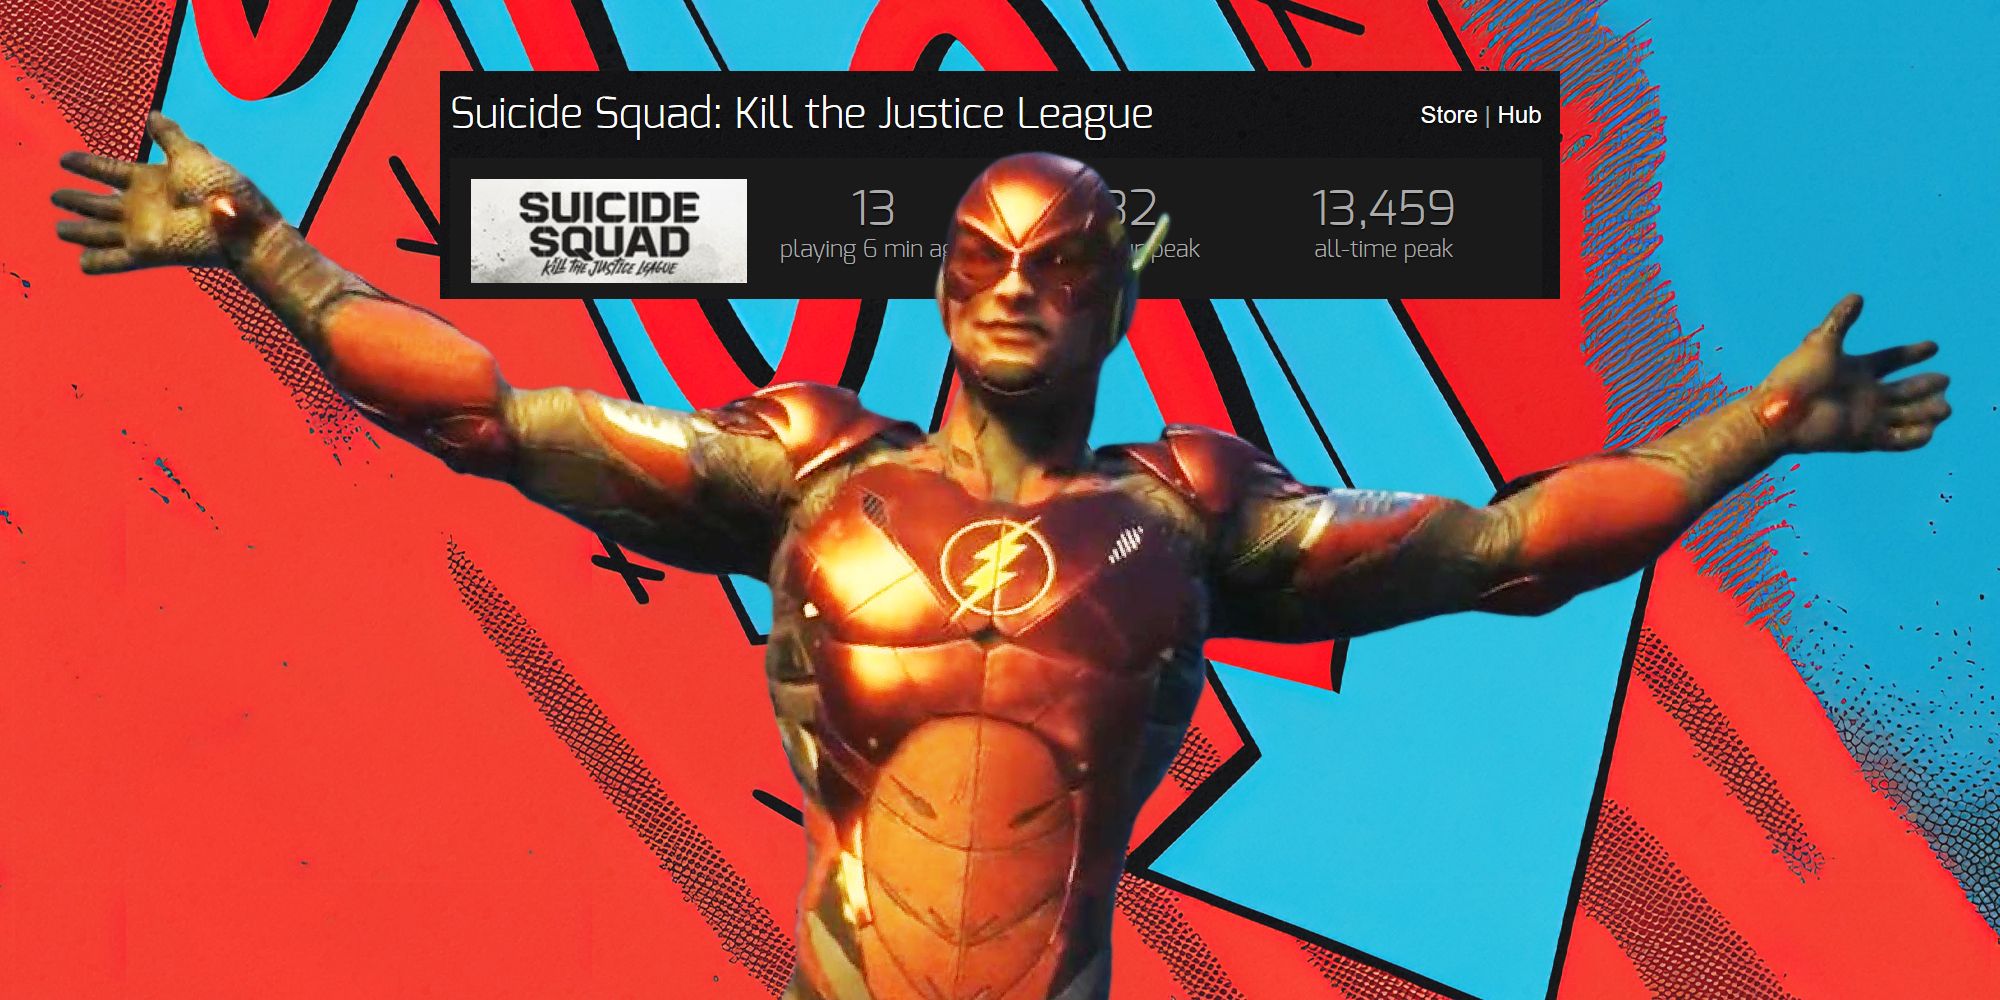 Suicide Squad Kill the Justice League's Flash with arms outspread in front of the game's dwindling Steam numbers